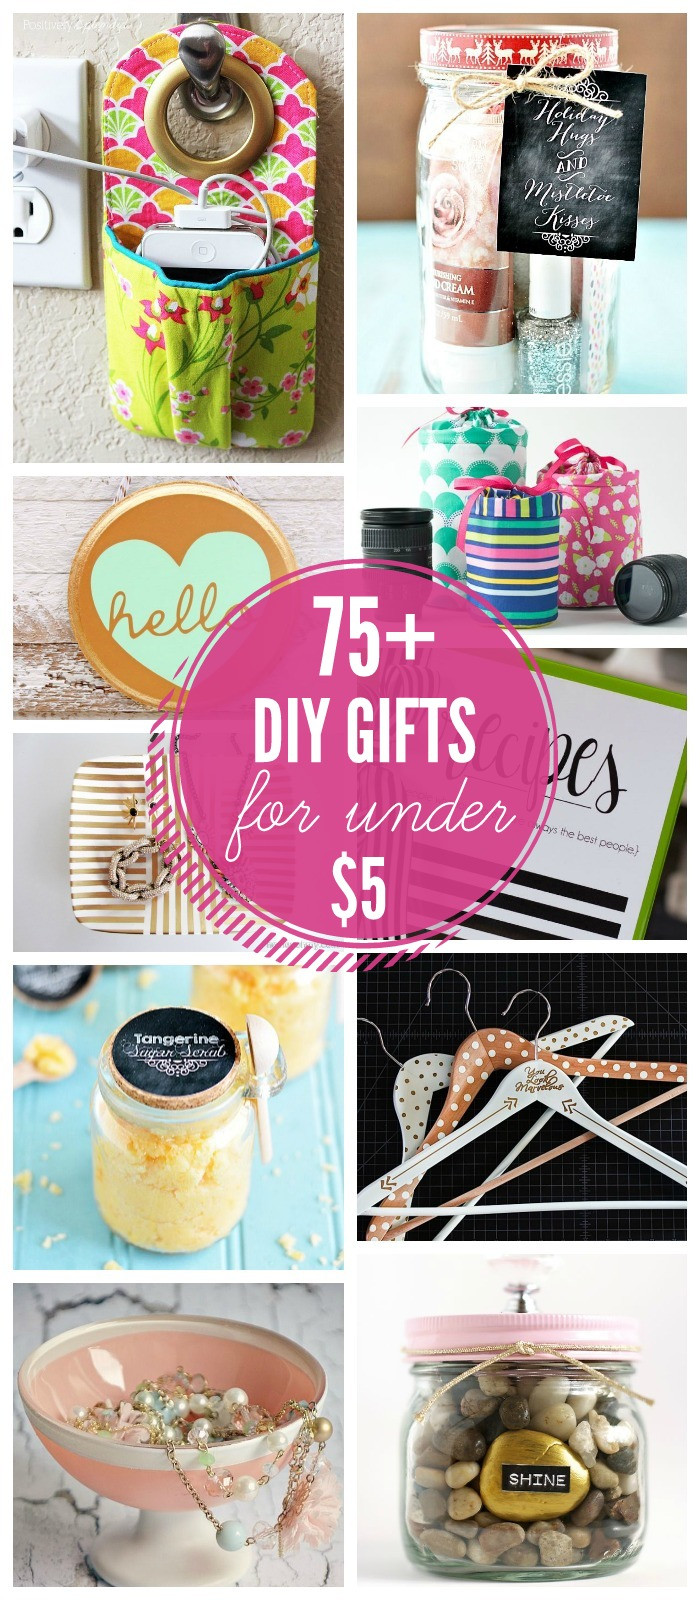 Cool DIY Christmas Gifts
 75 Gift Ideas under $5